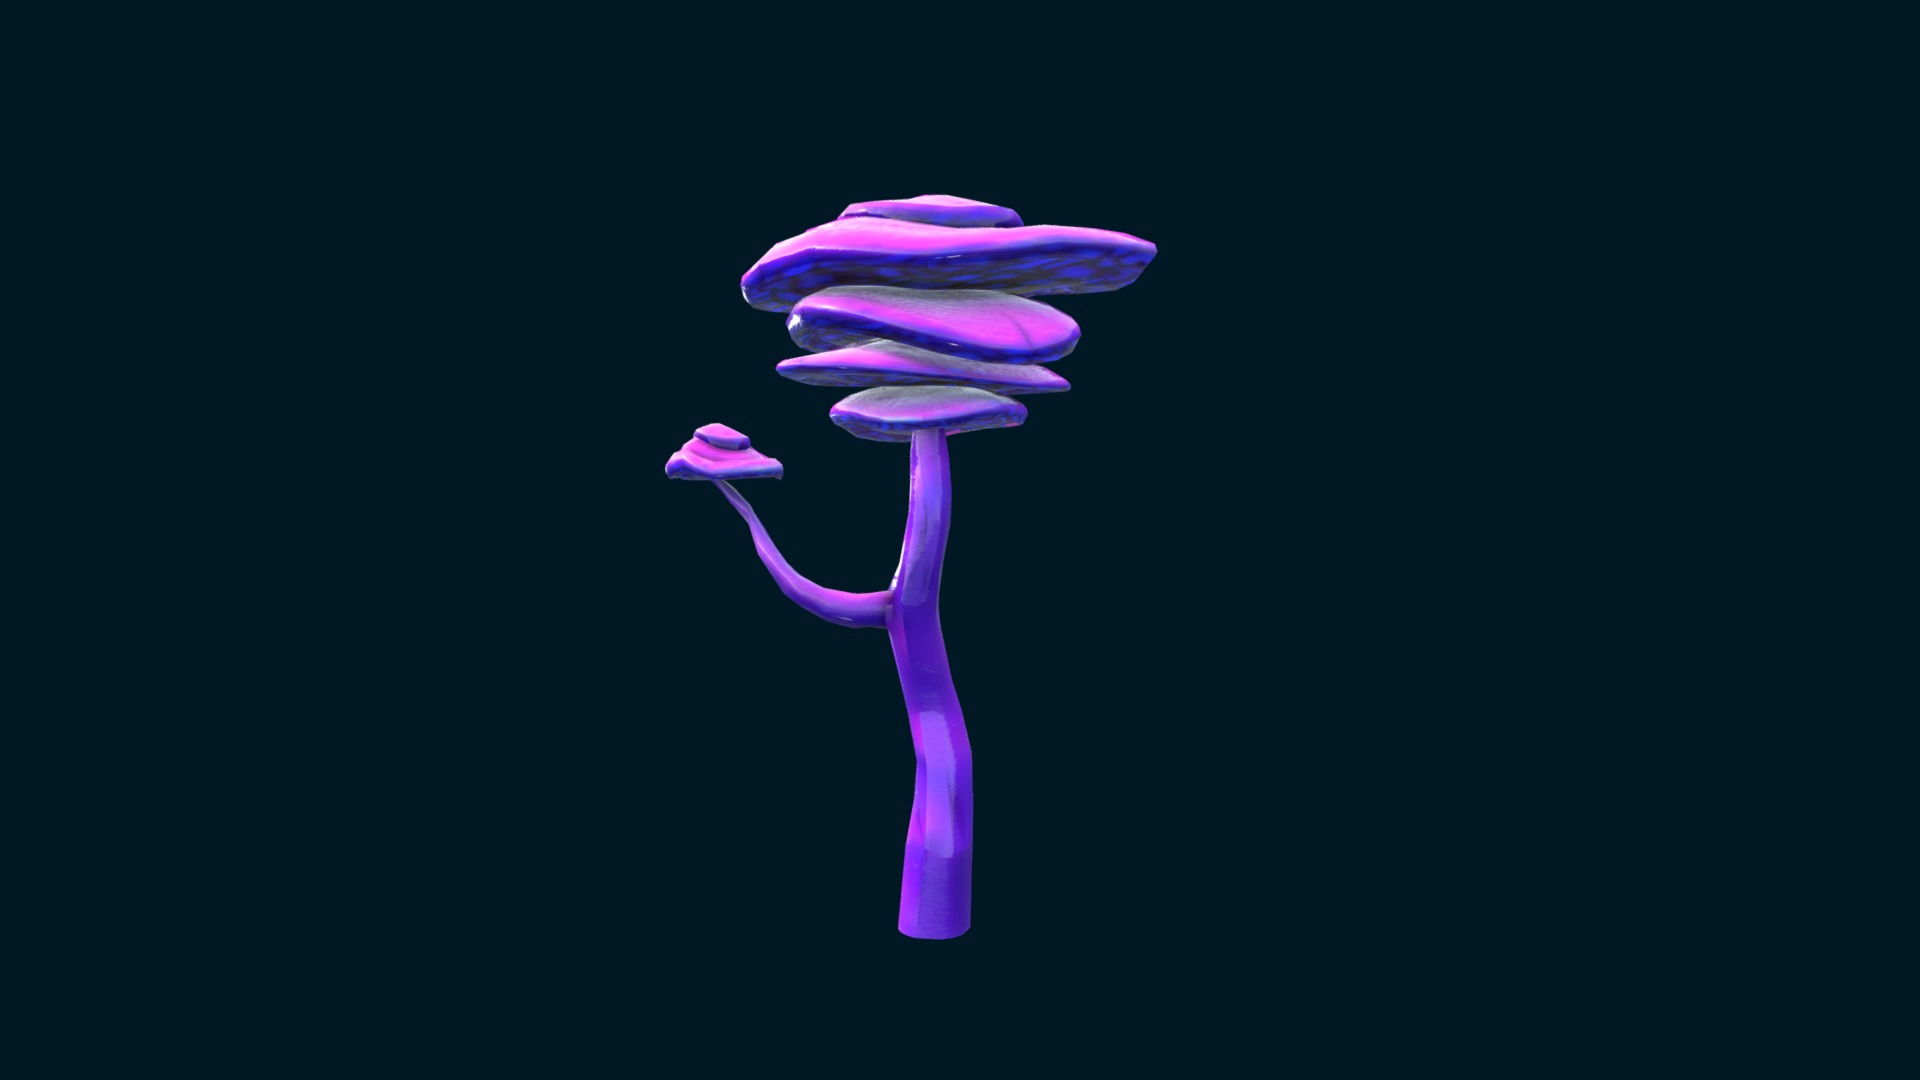 3D model Mushroom - This is a 3D model of the Mushroom. The 3D model is about a purple light in the dark.